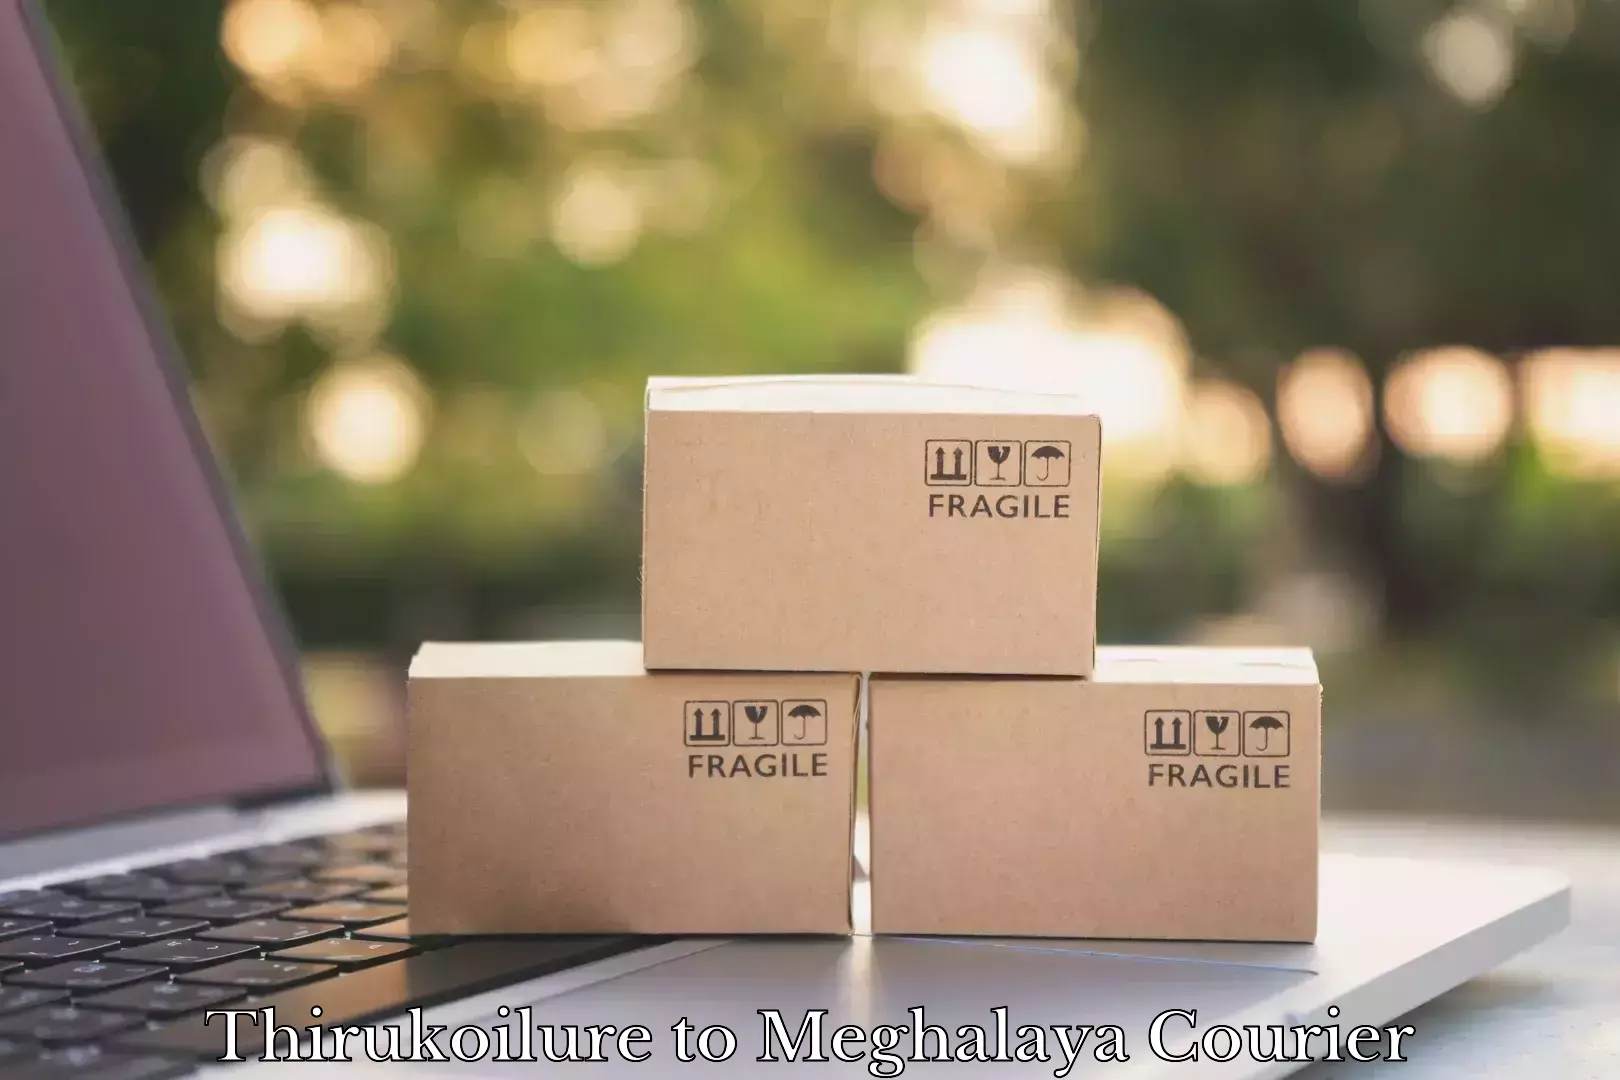 Professional movers and packers Thirukoilure to Meghalaya